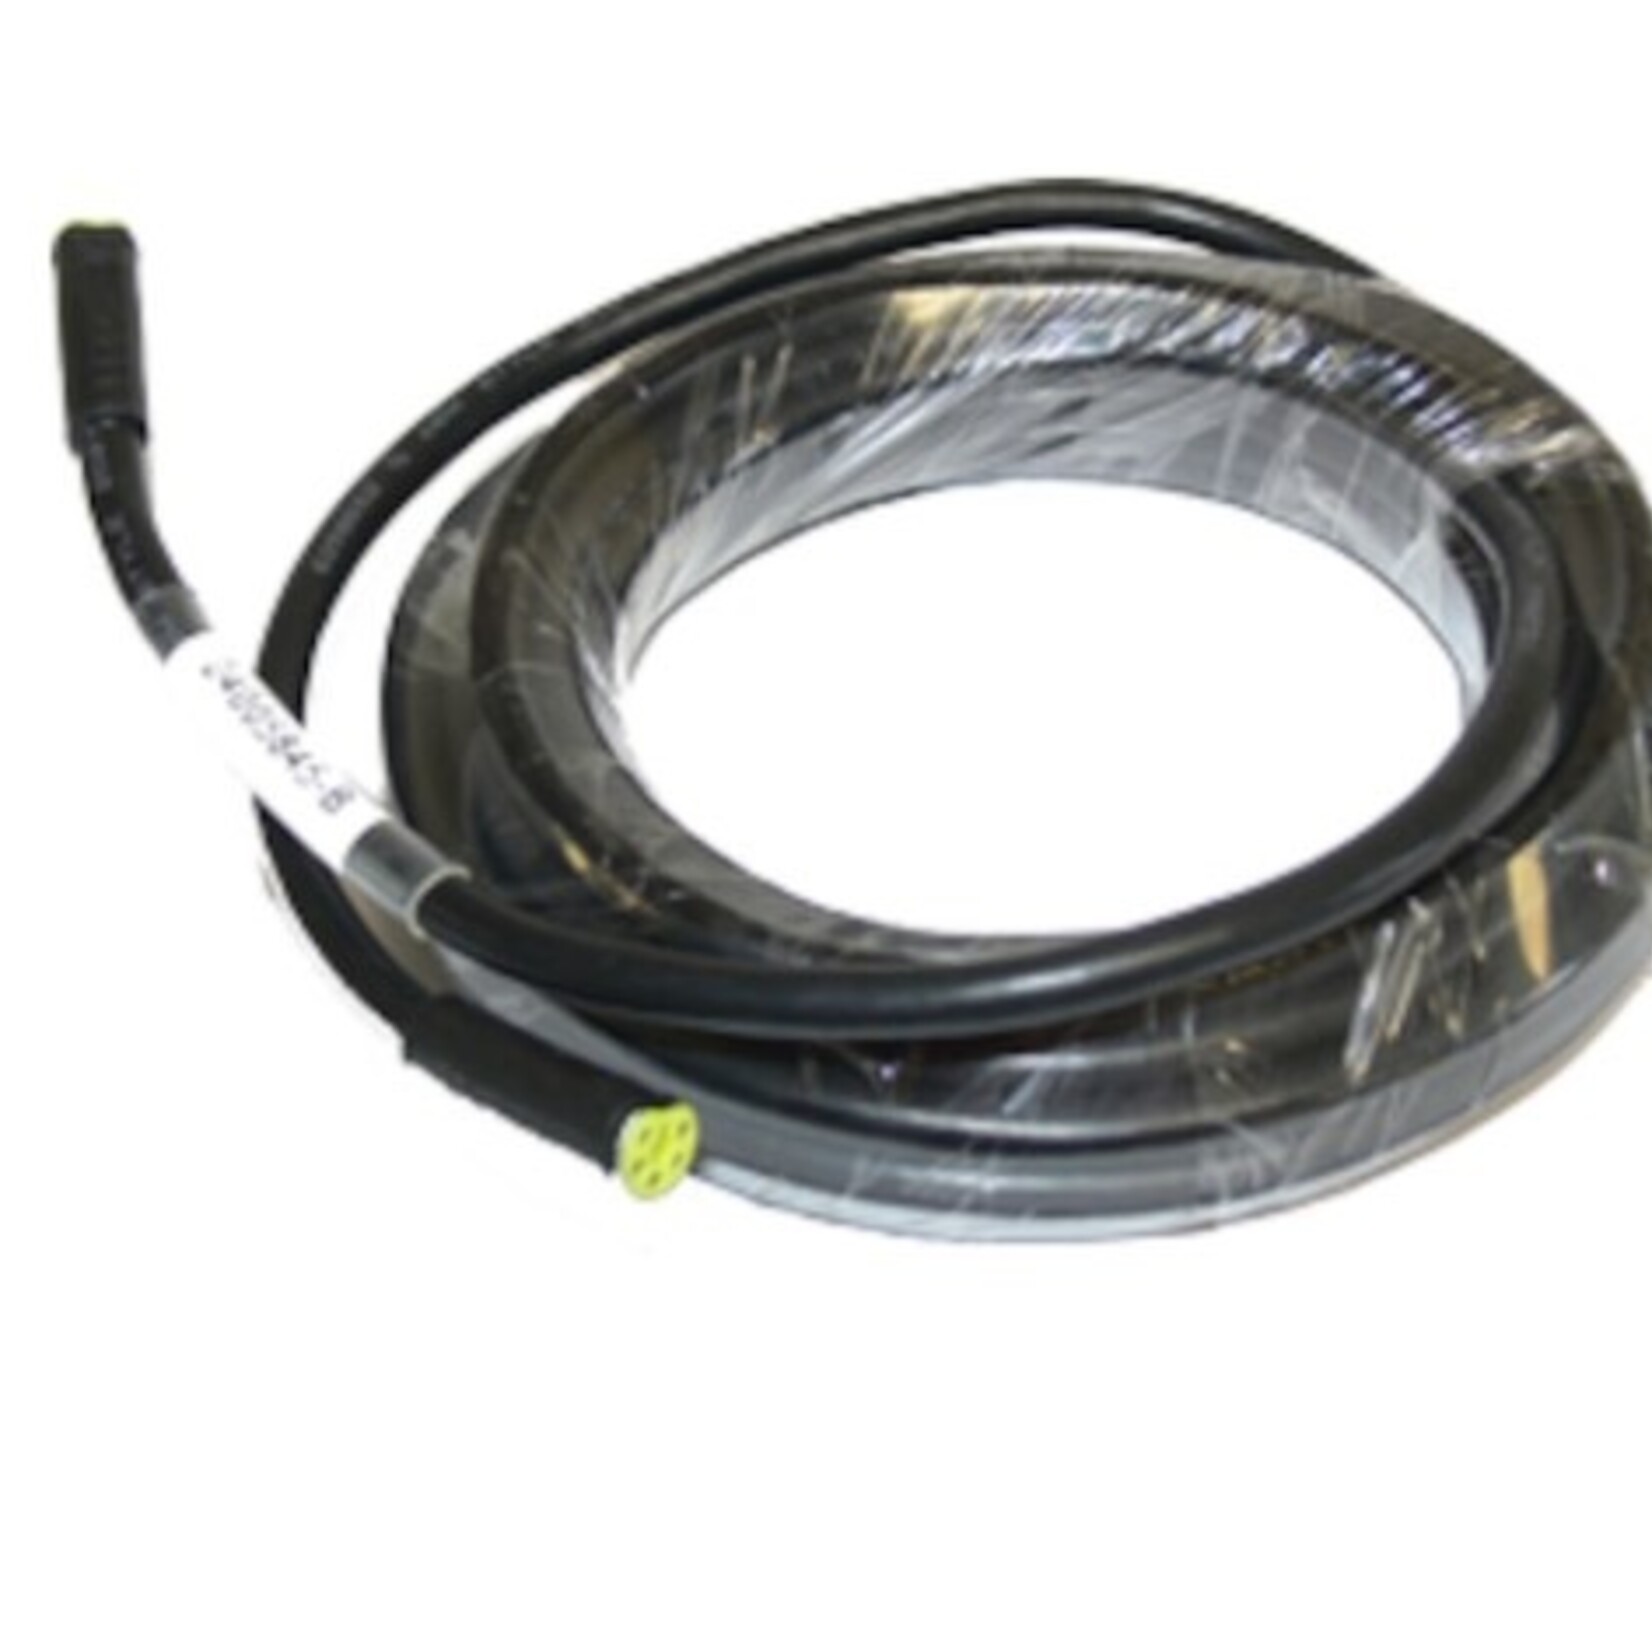 SimNet Cable - 5 m (16 ft)